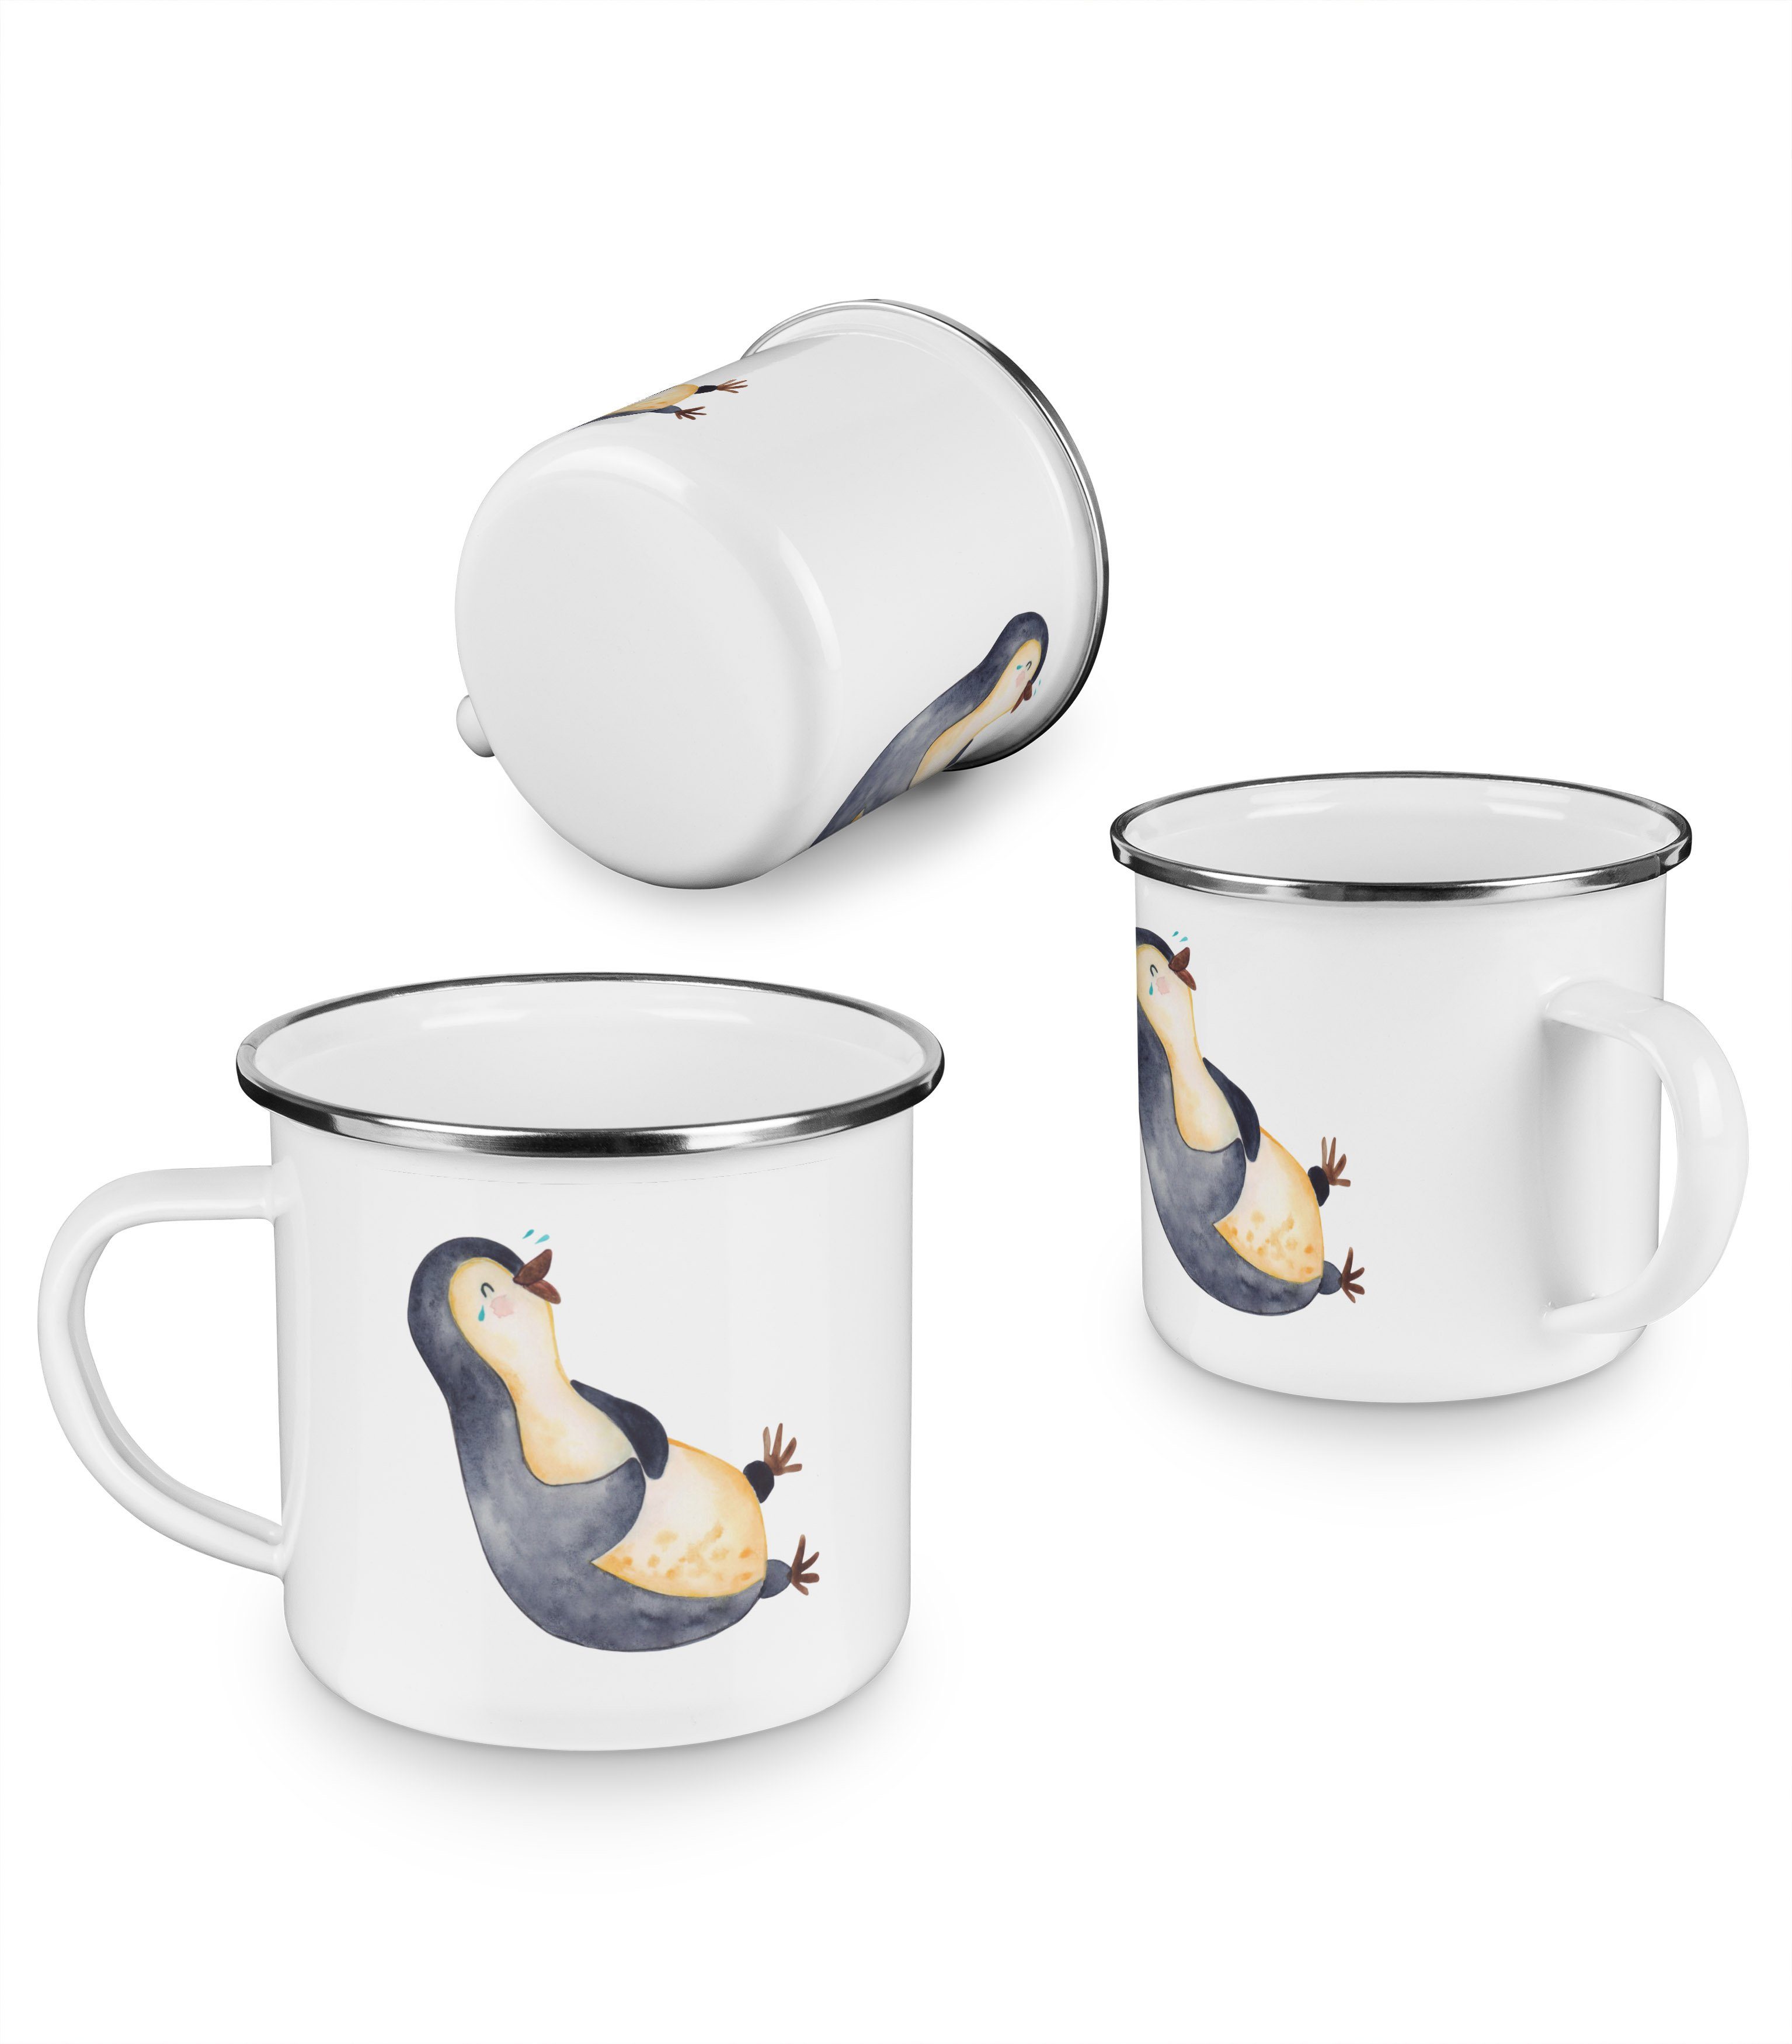 Mr. & Mrs. Campingbecher, lachend - Emaille Panda Opti, Geschenk, Pinguin Weiß Becher funny, Emaille 